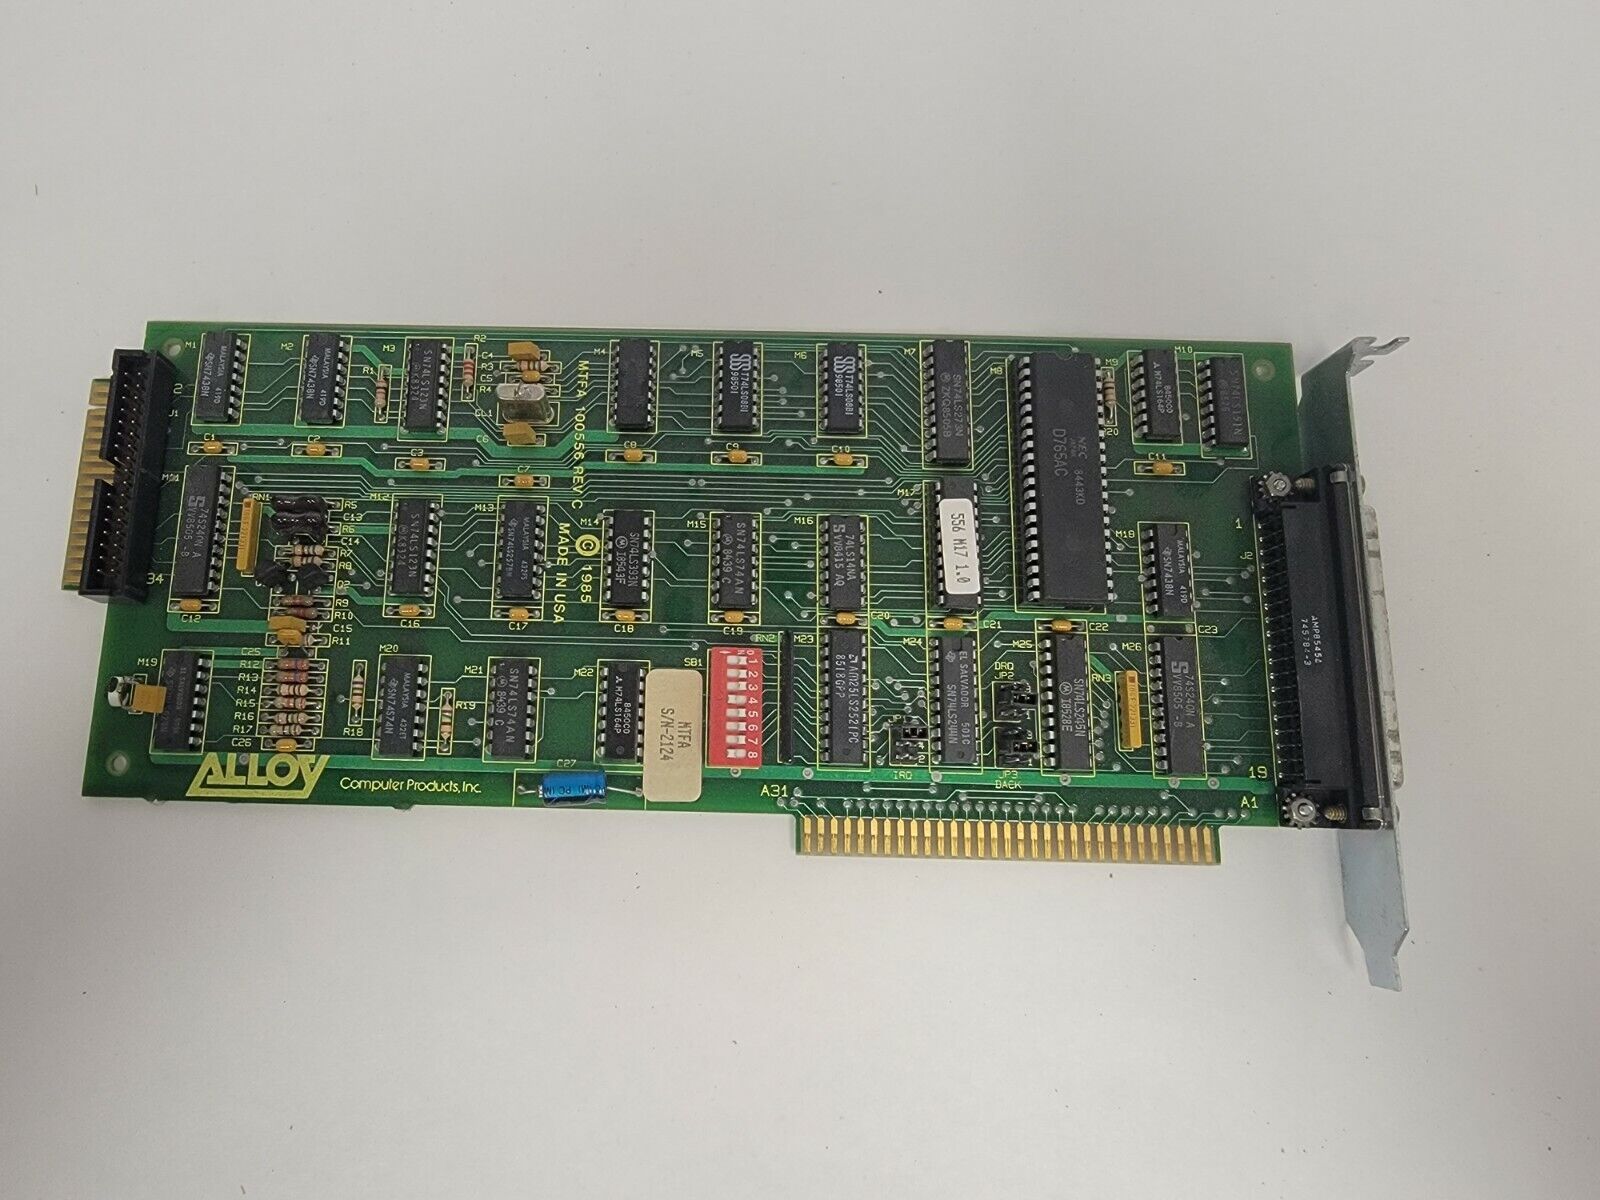 Rare Vintage 1985 Alloy Computer Products SCSI Card Circuit Board 